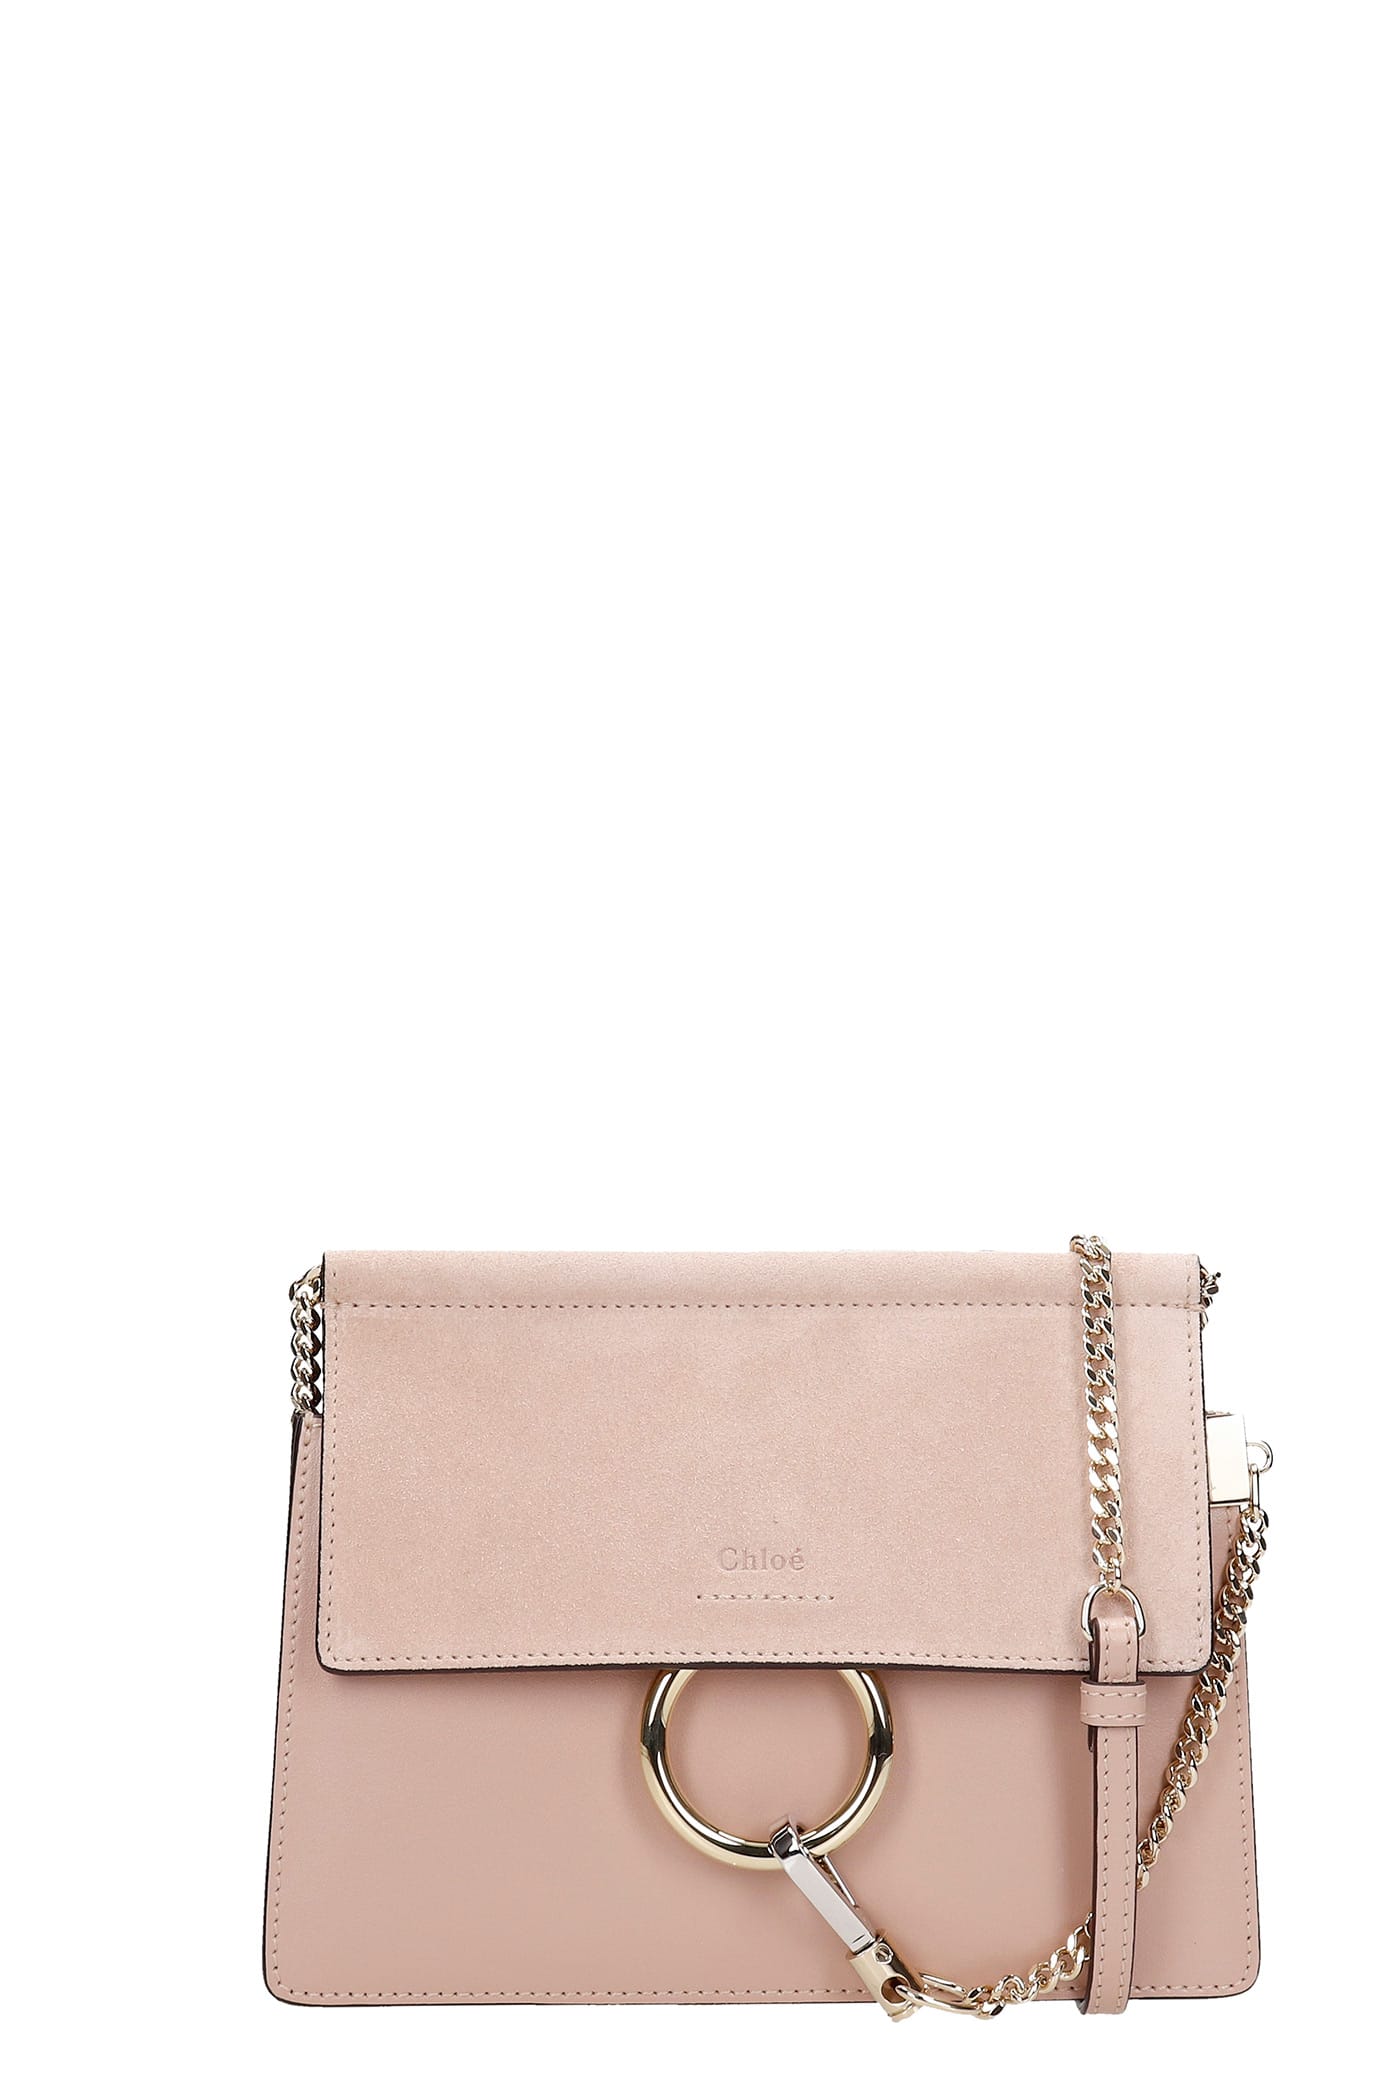 Chloé Faye Smal Shoulder Bag In Rose-pink Suede And Leather